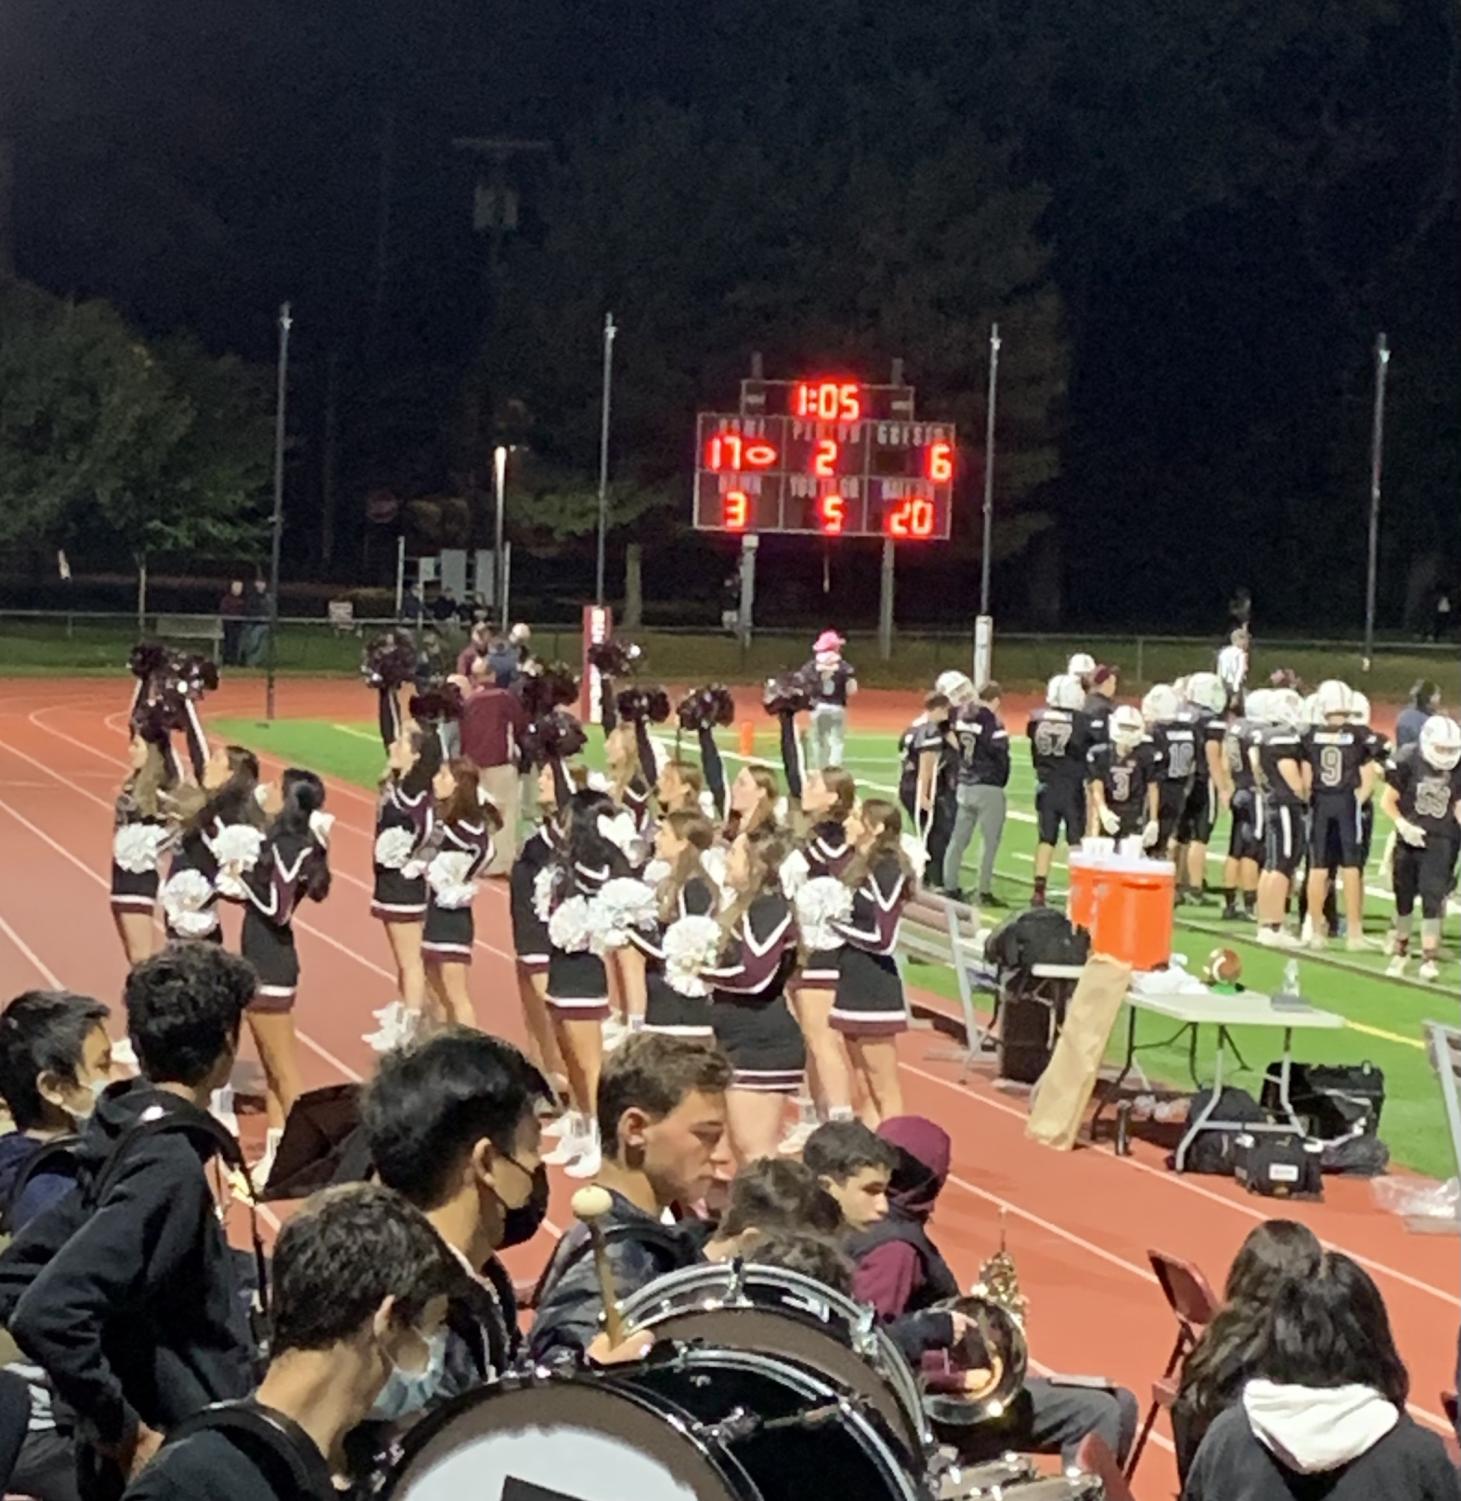 Highlights+from+Scarsdale%E2%80%99s+Senior+Football+Game